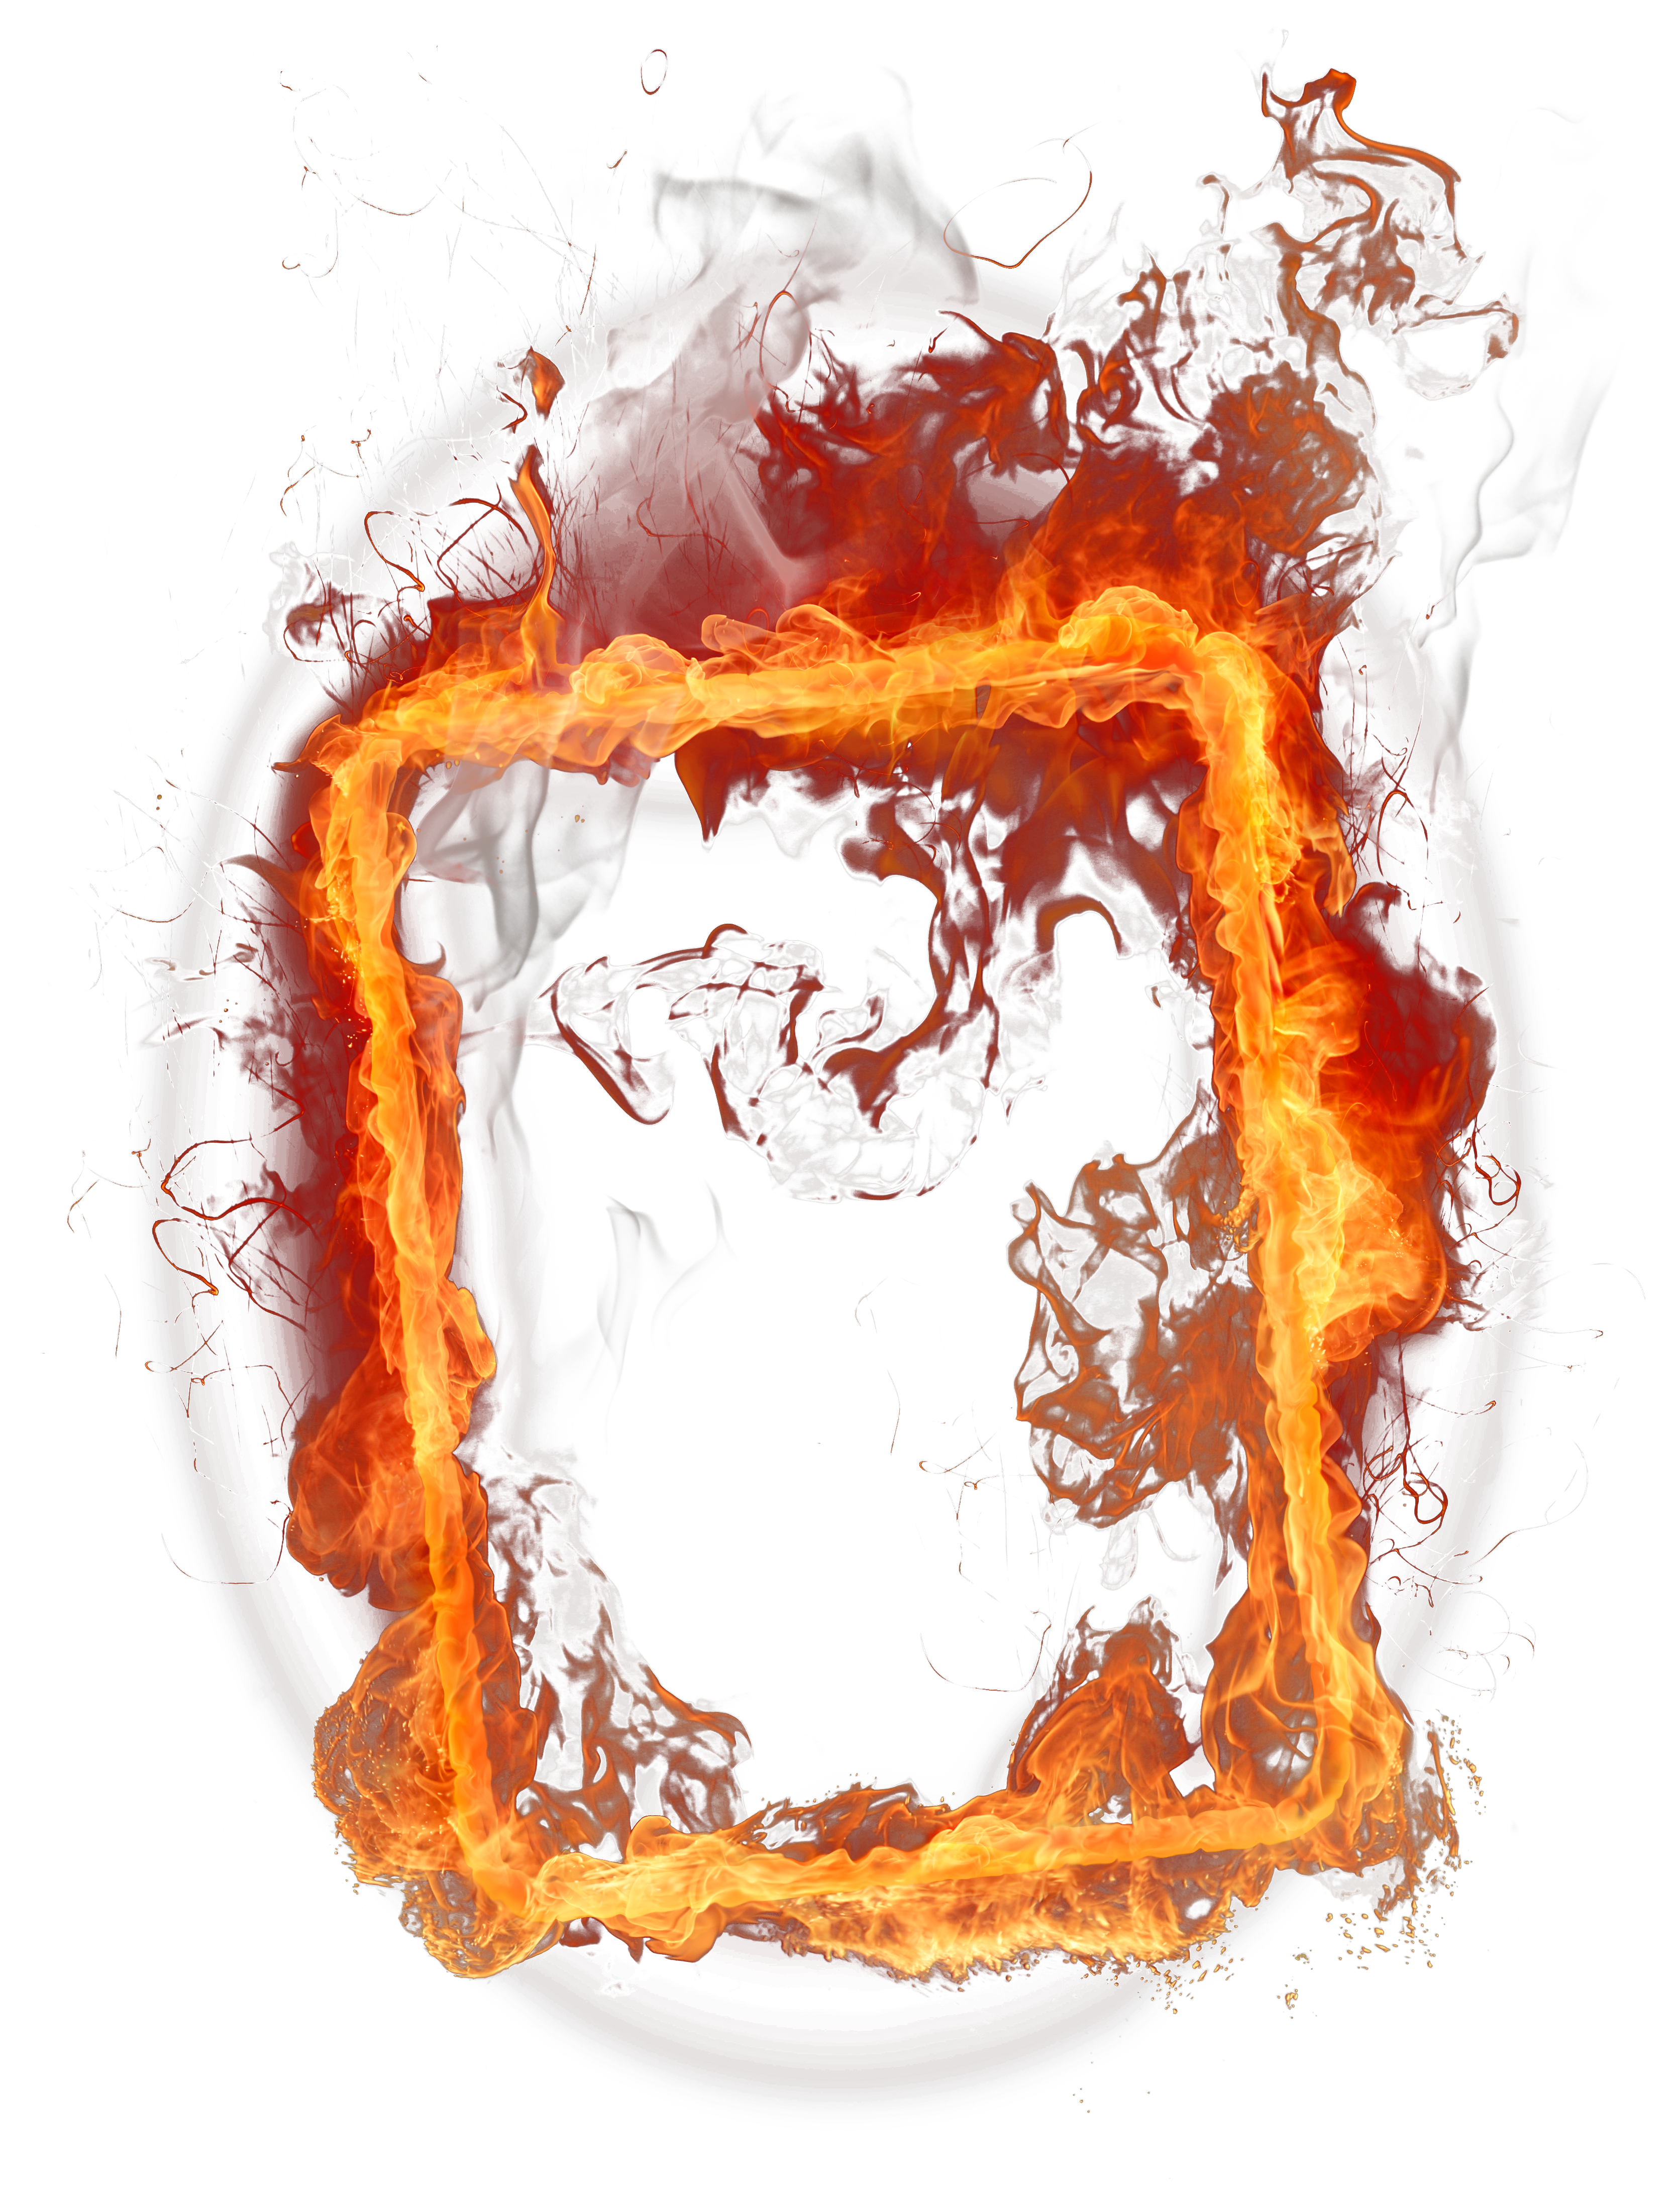 Fire Effect PNG Image